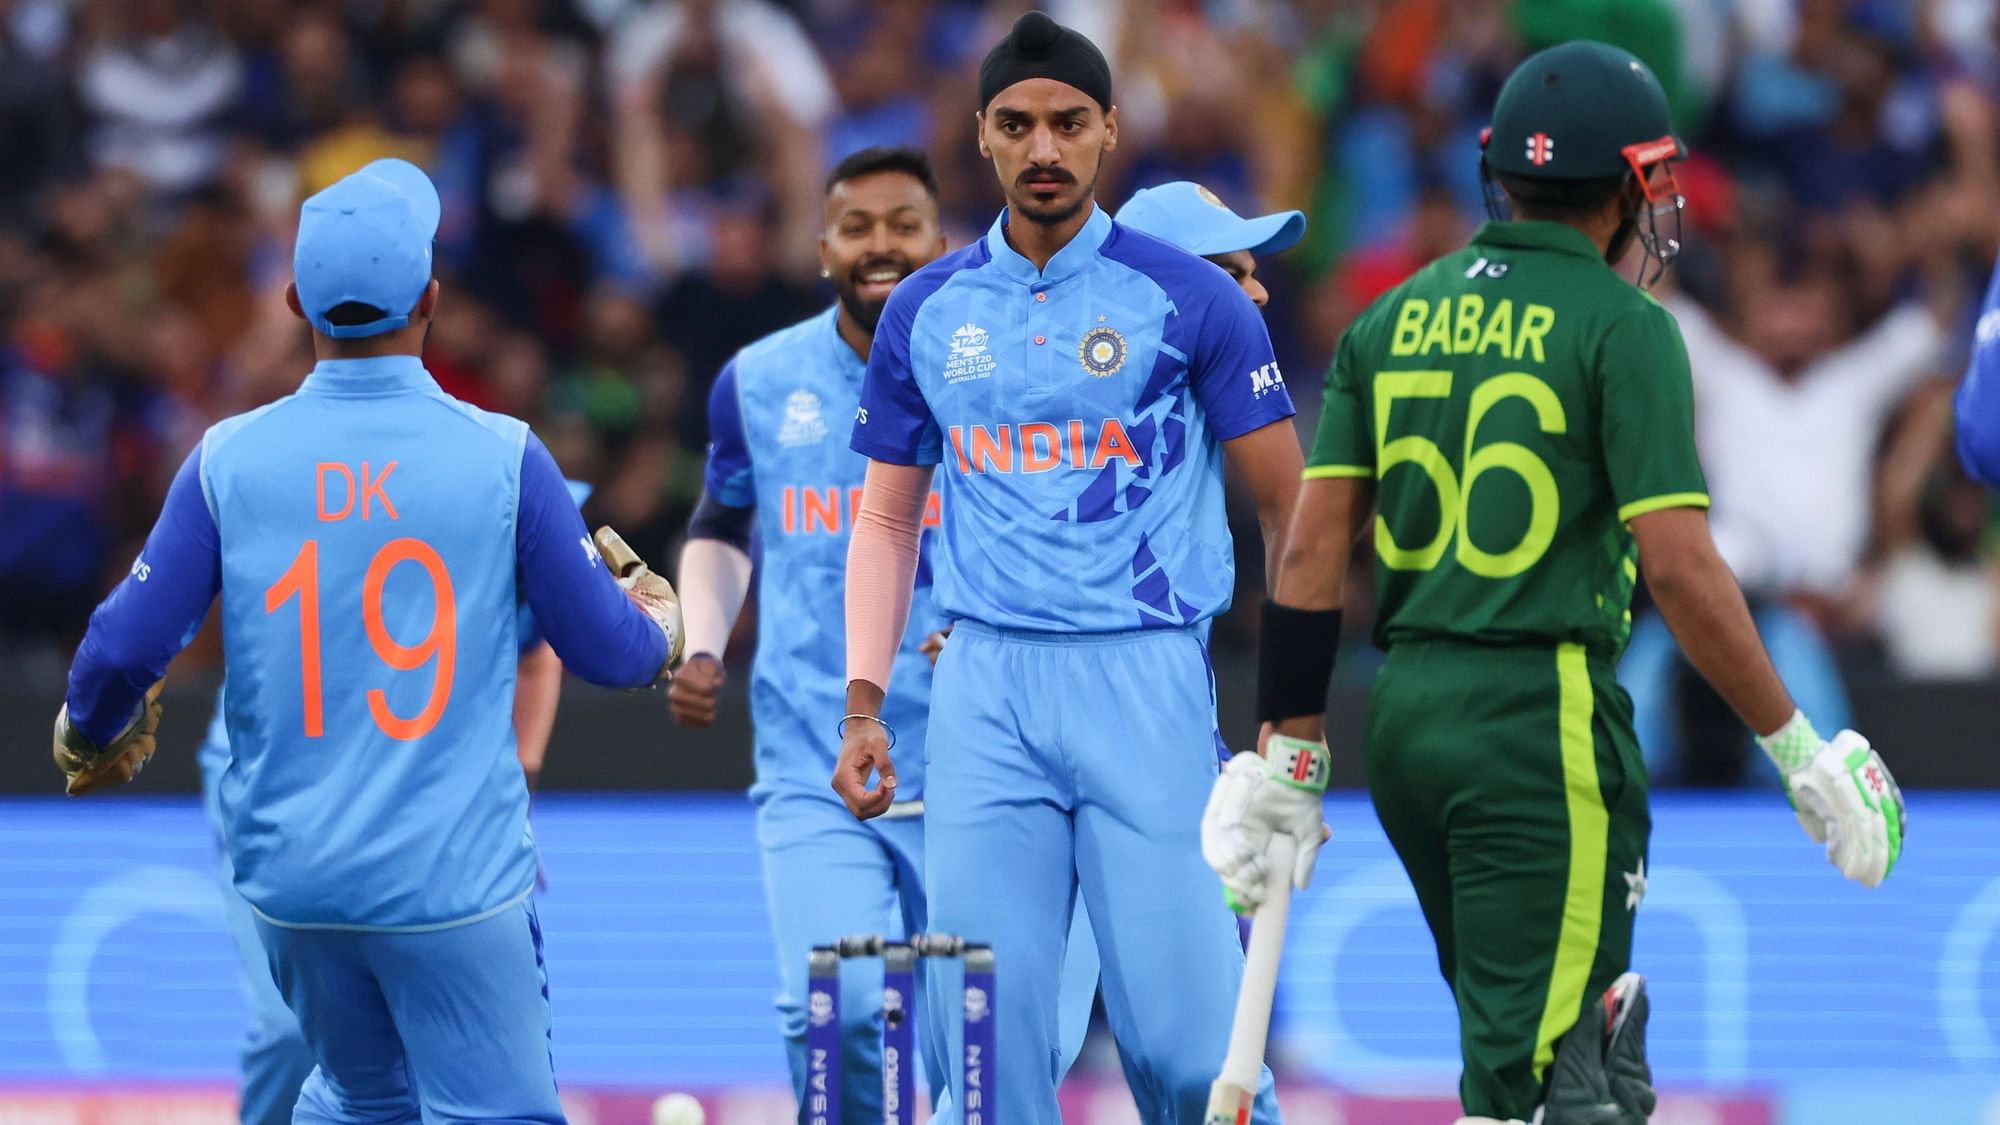 ICC T20 World Cup 2022 Points Table Complete Table Here; India vs Pakistan Match Details; Check Latest Updates